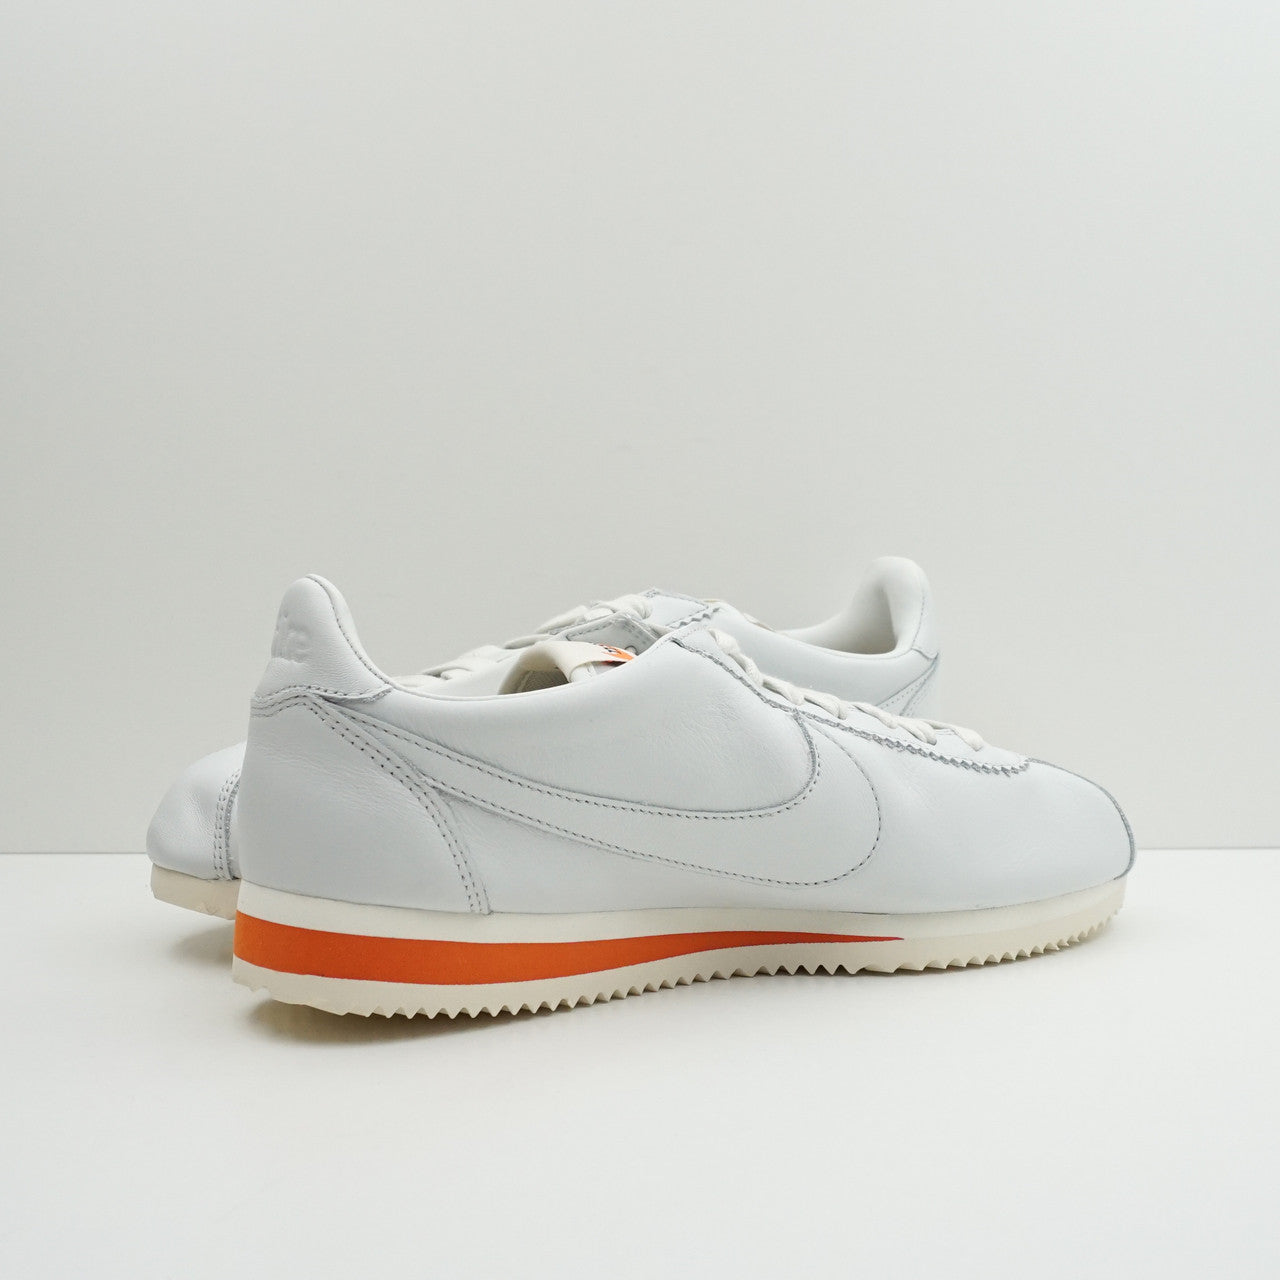 Nike Classic Cortez Kenny Moore Track Spike